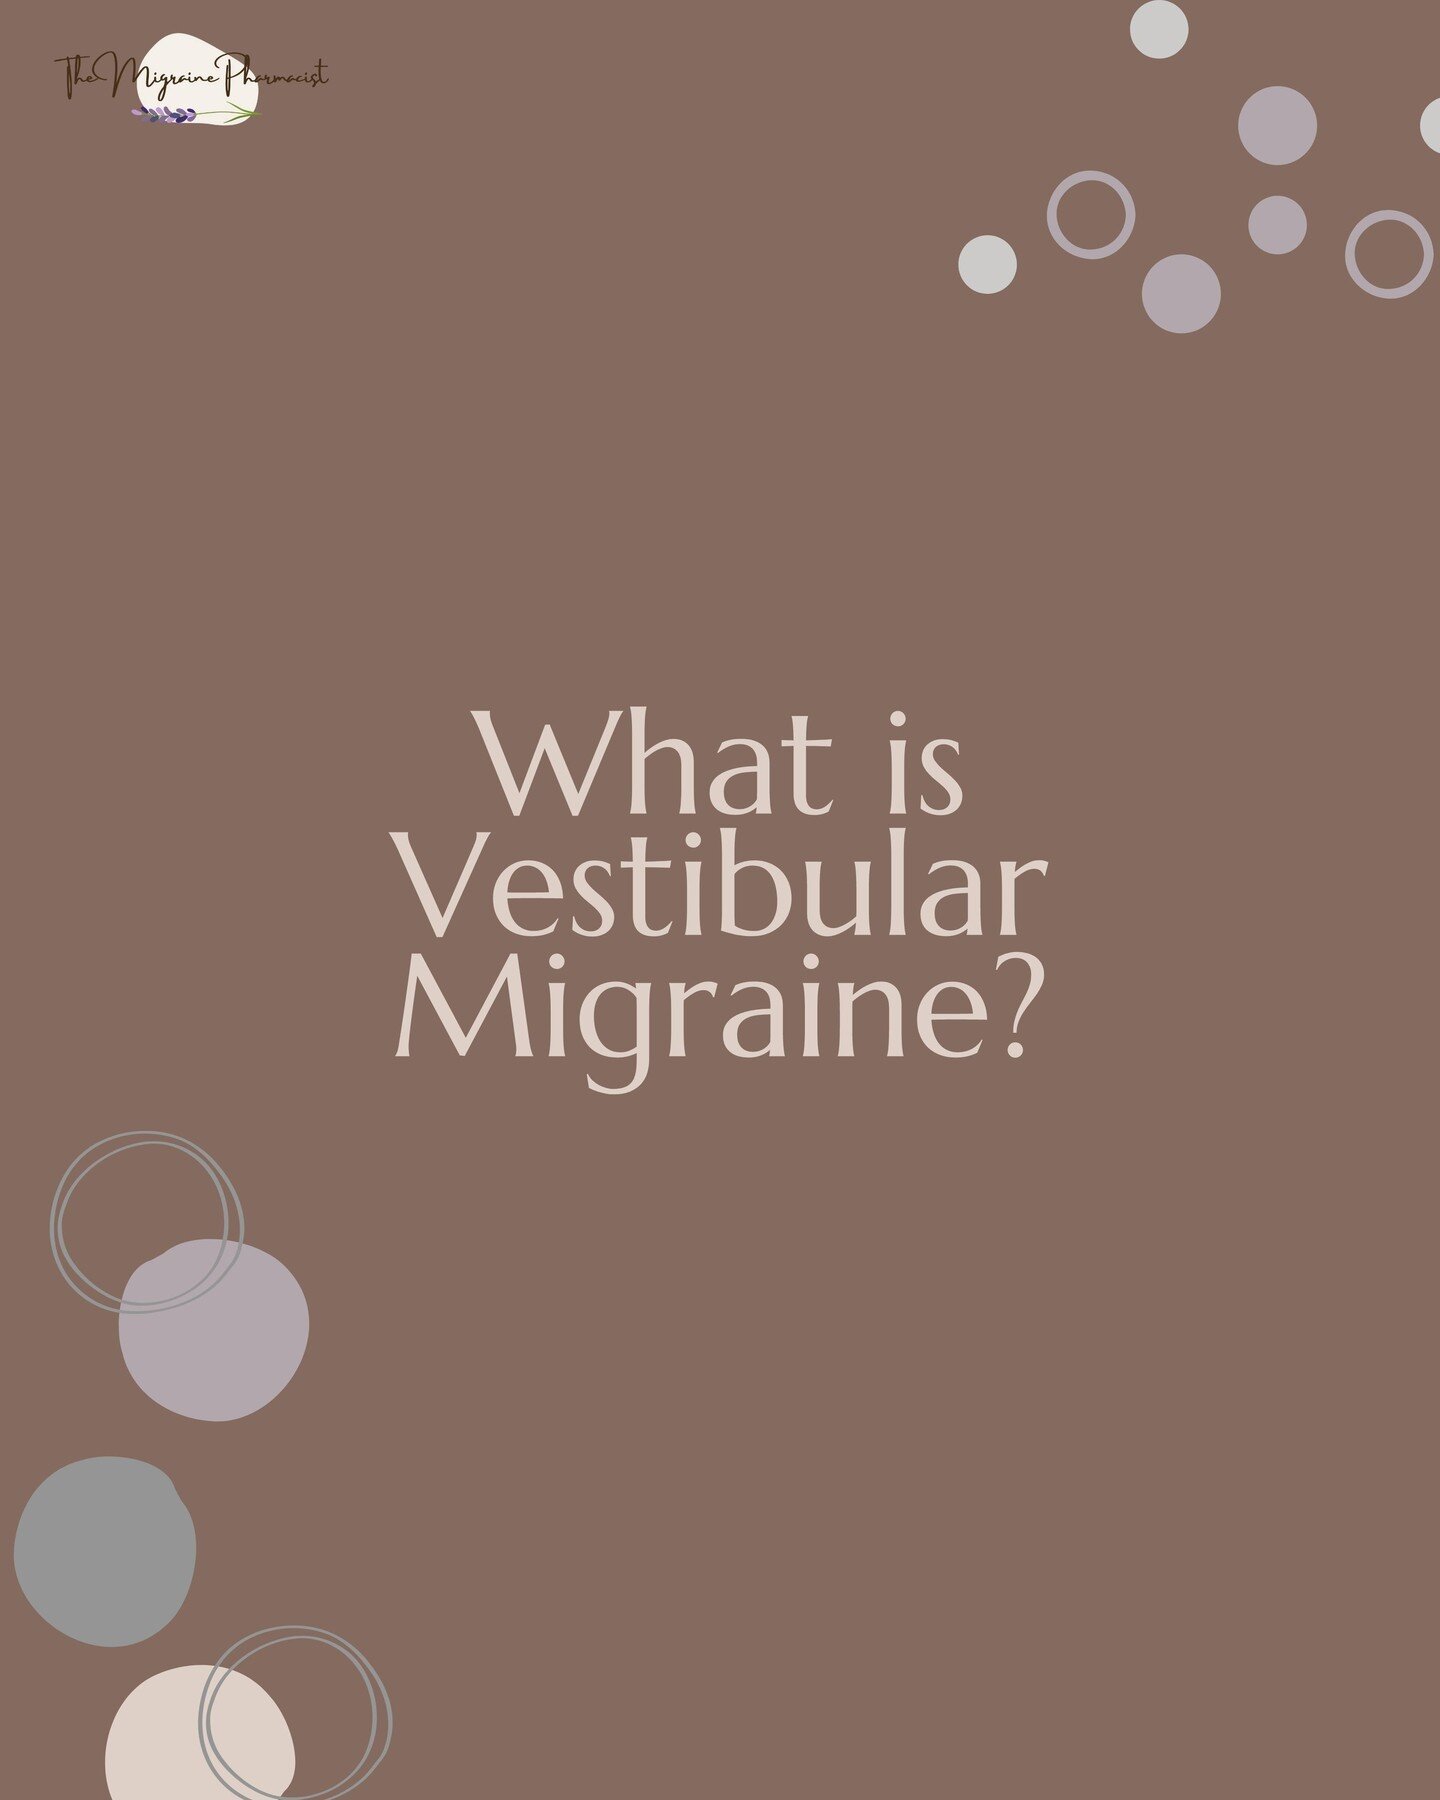 It is a misconception that vestibular migraine is always accompanied by a headache. 
It is very common for people living who are living with vestibular migraine to have a history of motion sickness. There are many names for this type of problem. Your